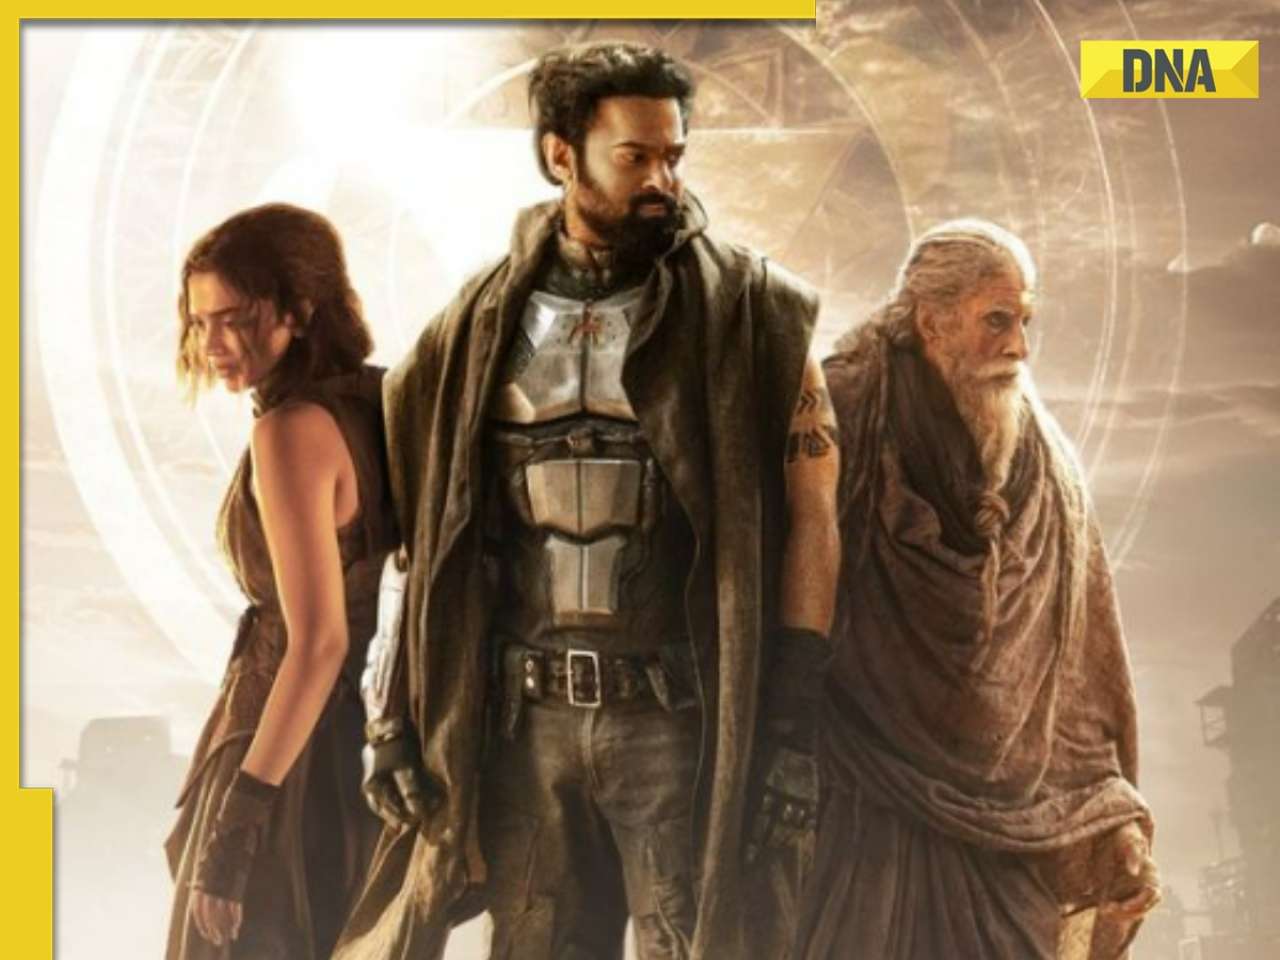 Prabhas justifies why Kalki 2898 AD has highest budget in history of Indian cinema, says it cost Rs 600 crore because...